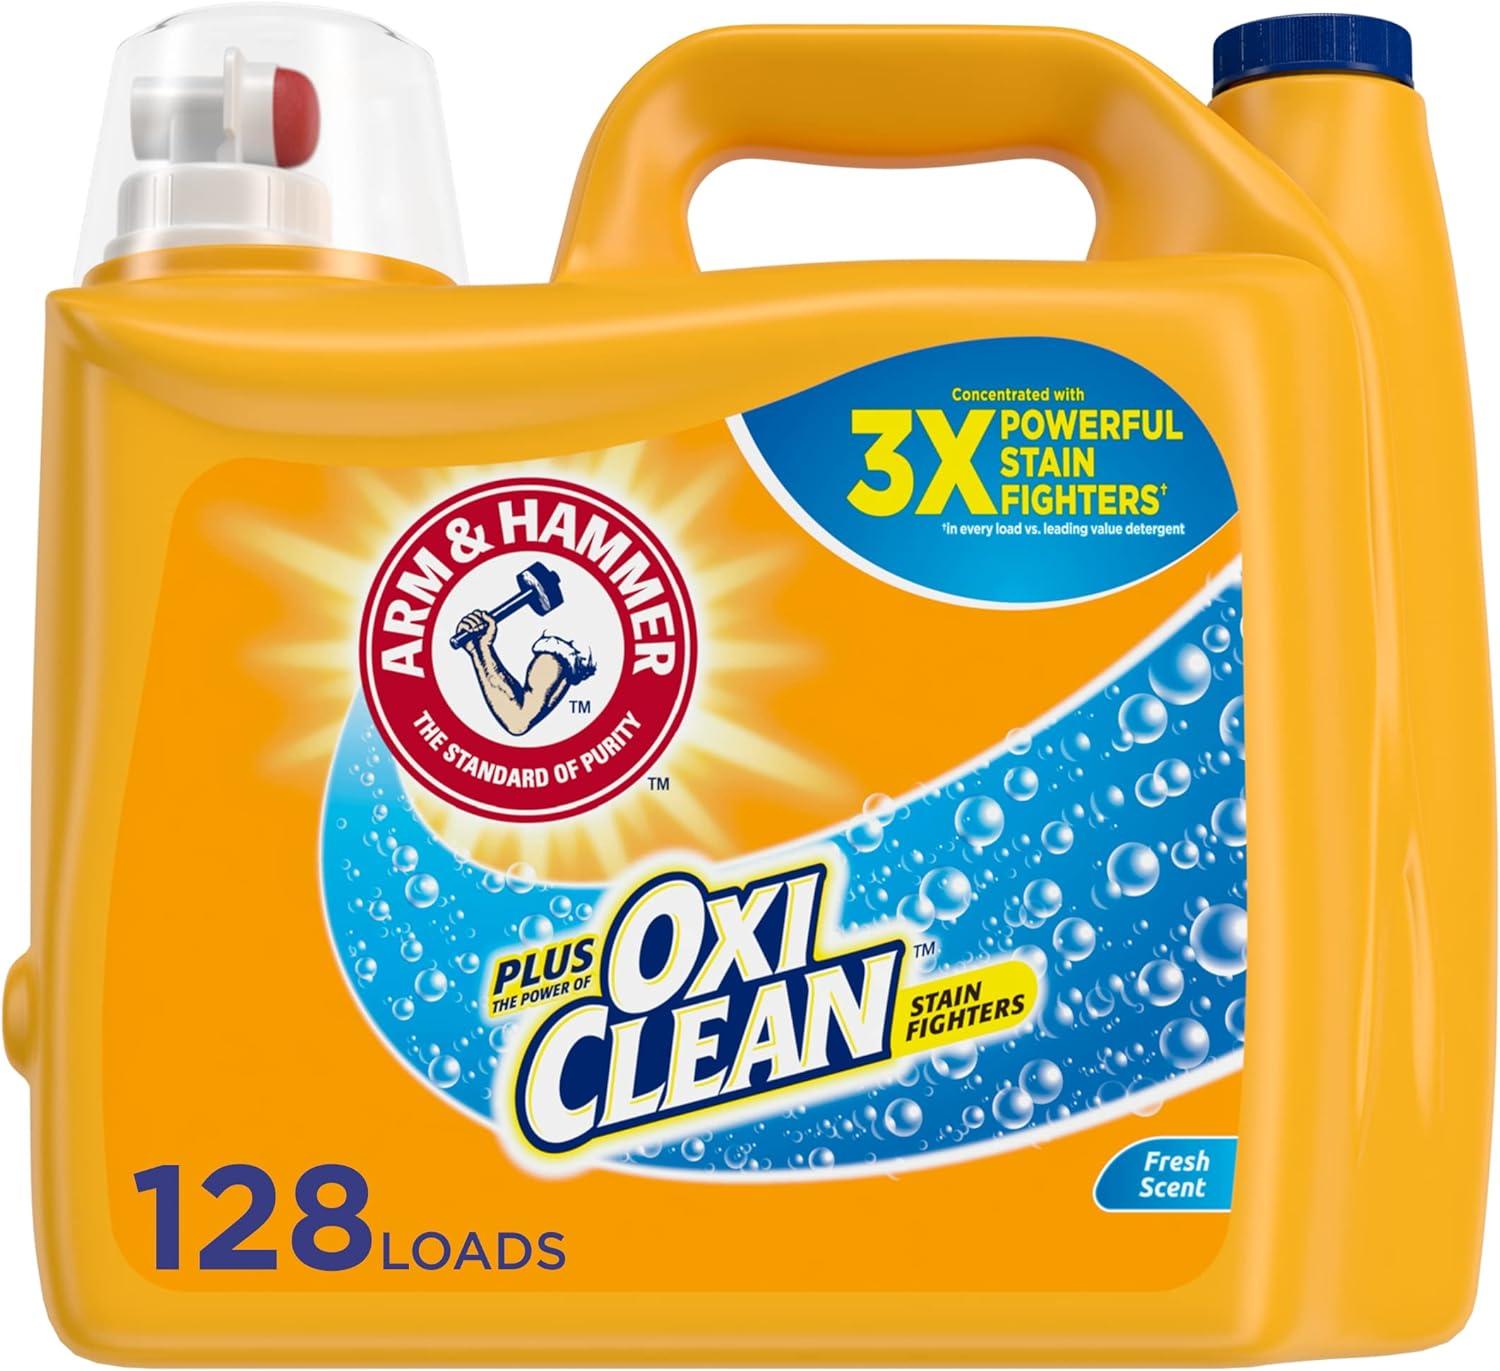 Arm Hammer Plus OxiClean Fresh Scent Liquid Laundry Detergent 166oz for $9.09 Shipped